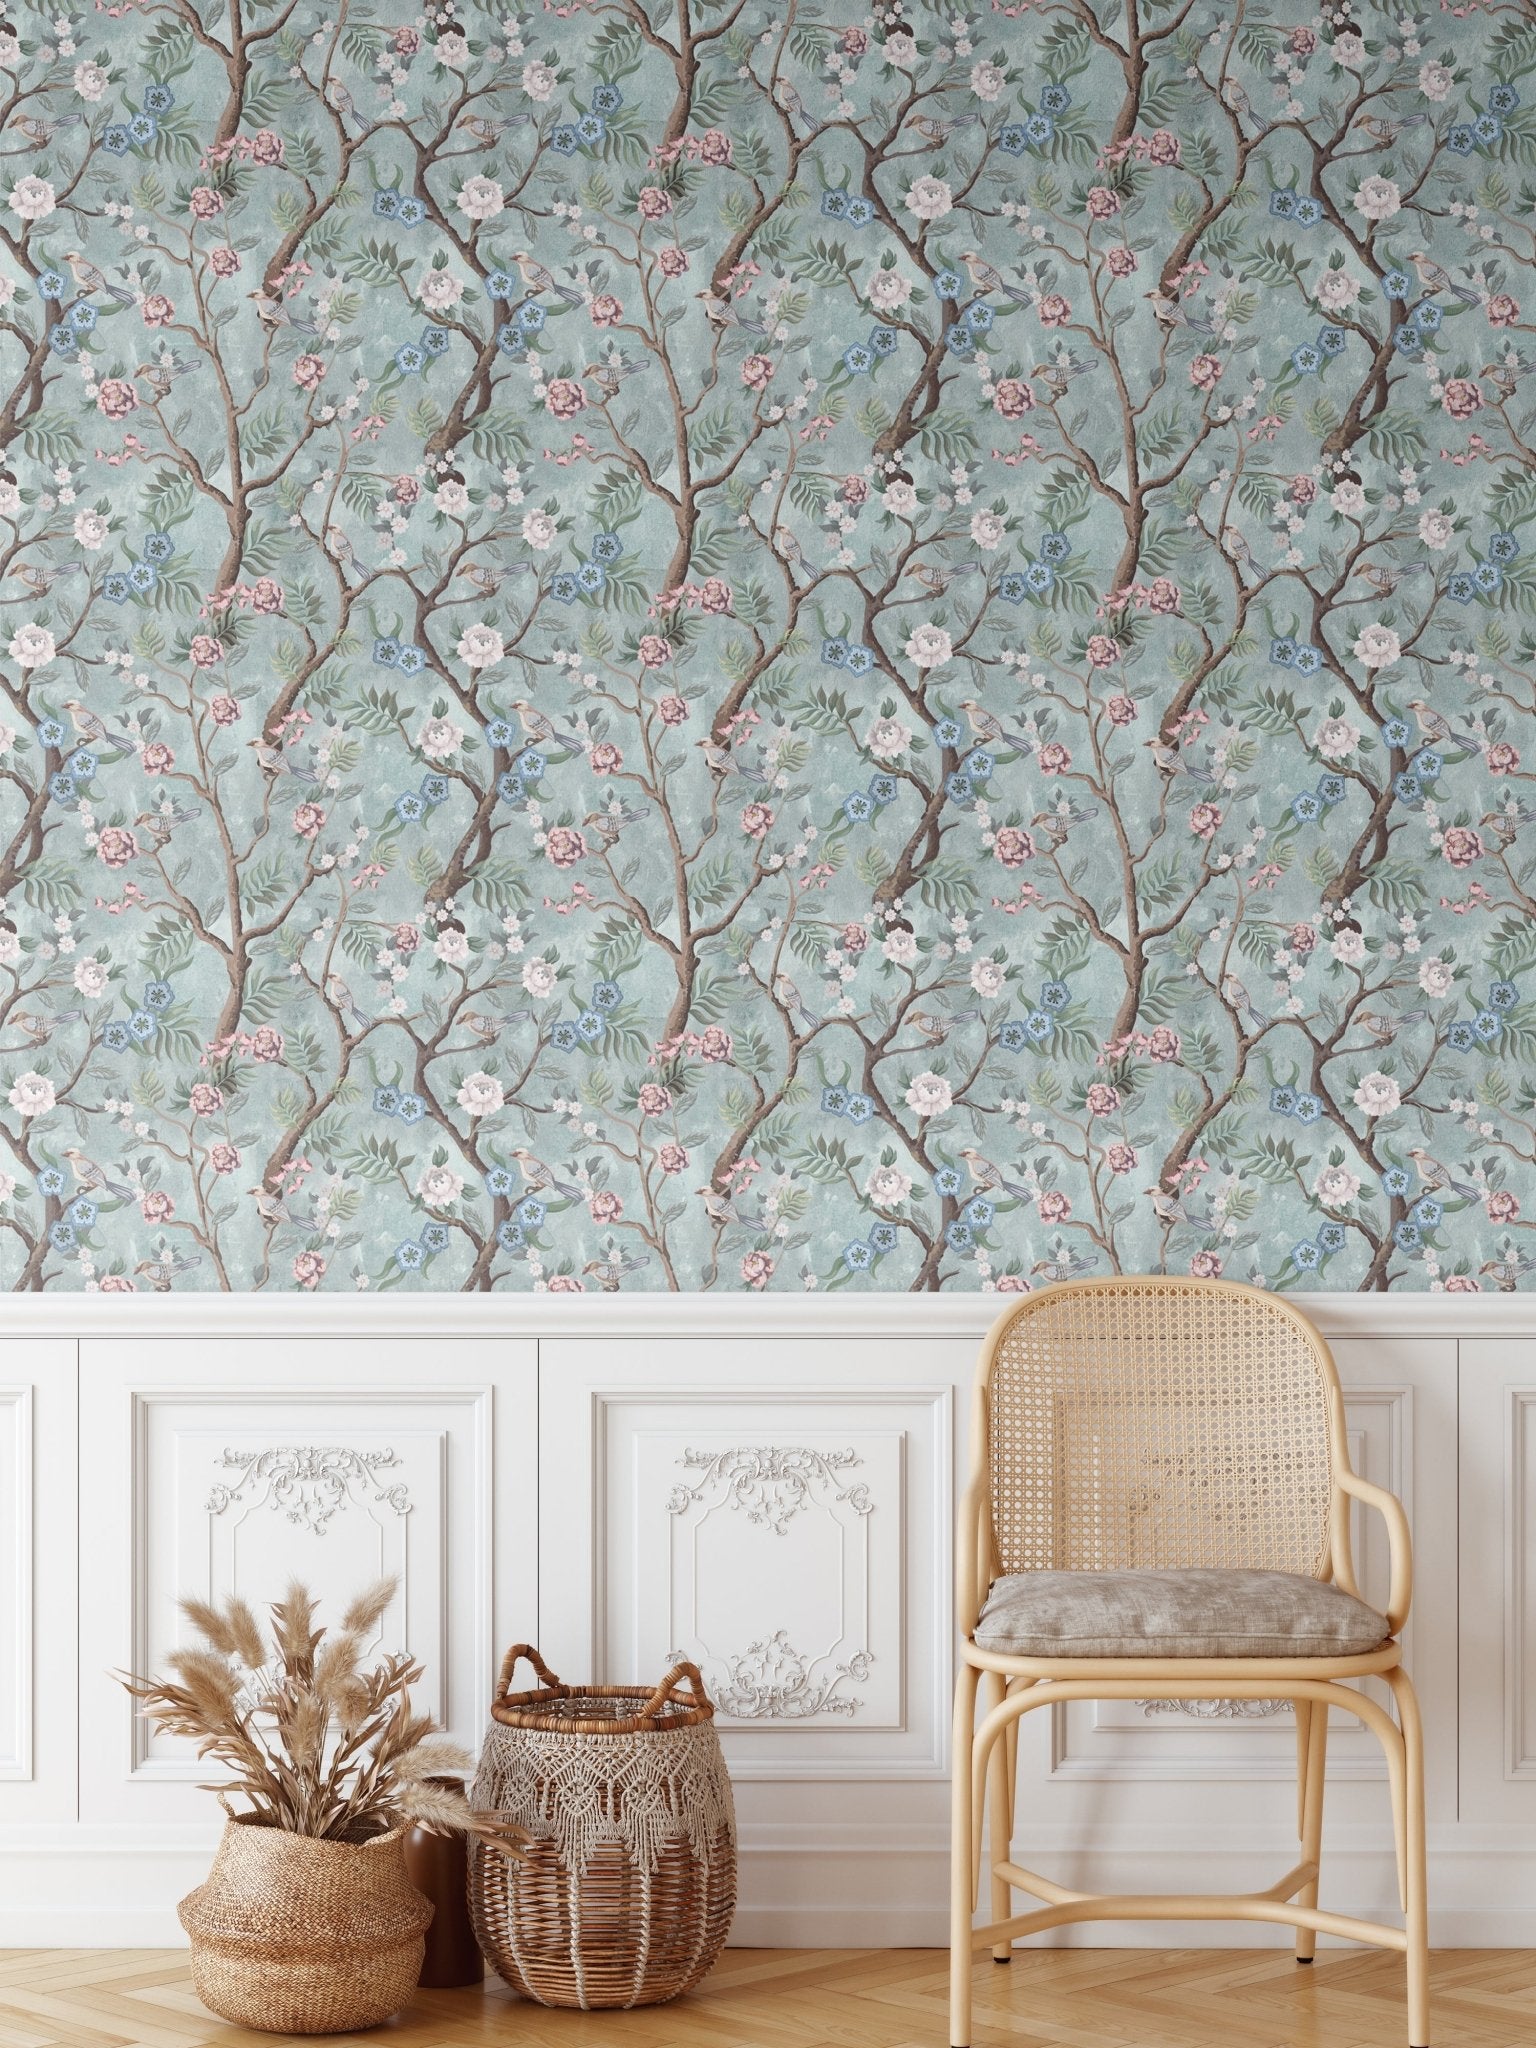 Chinoiserie classic peel and stick removable wallpaper